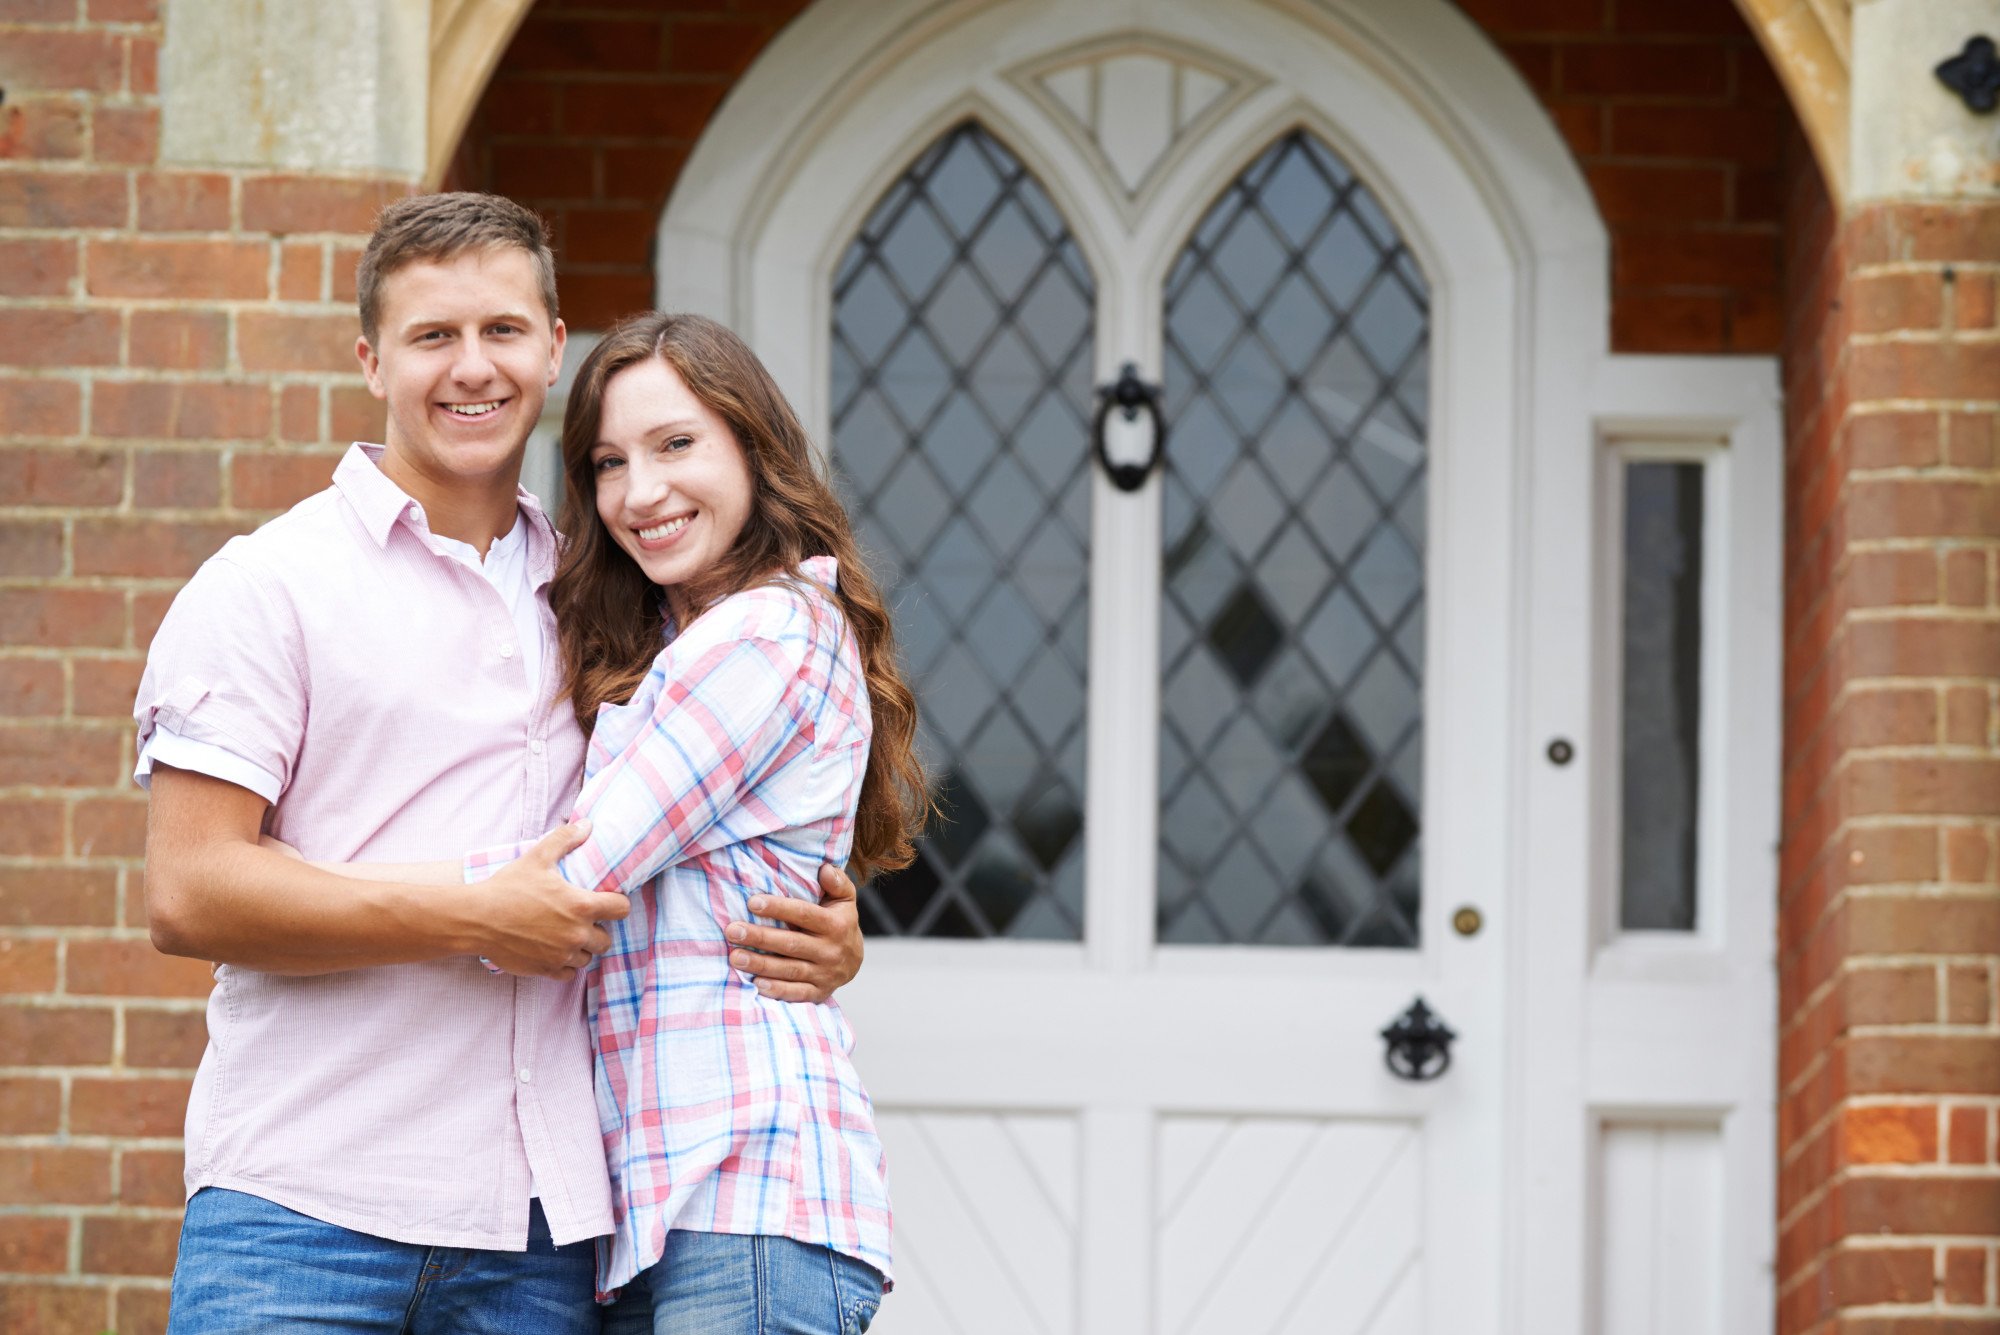 Top Tips for Buying a Home: A First-Time Buyer's Guide